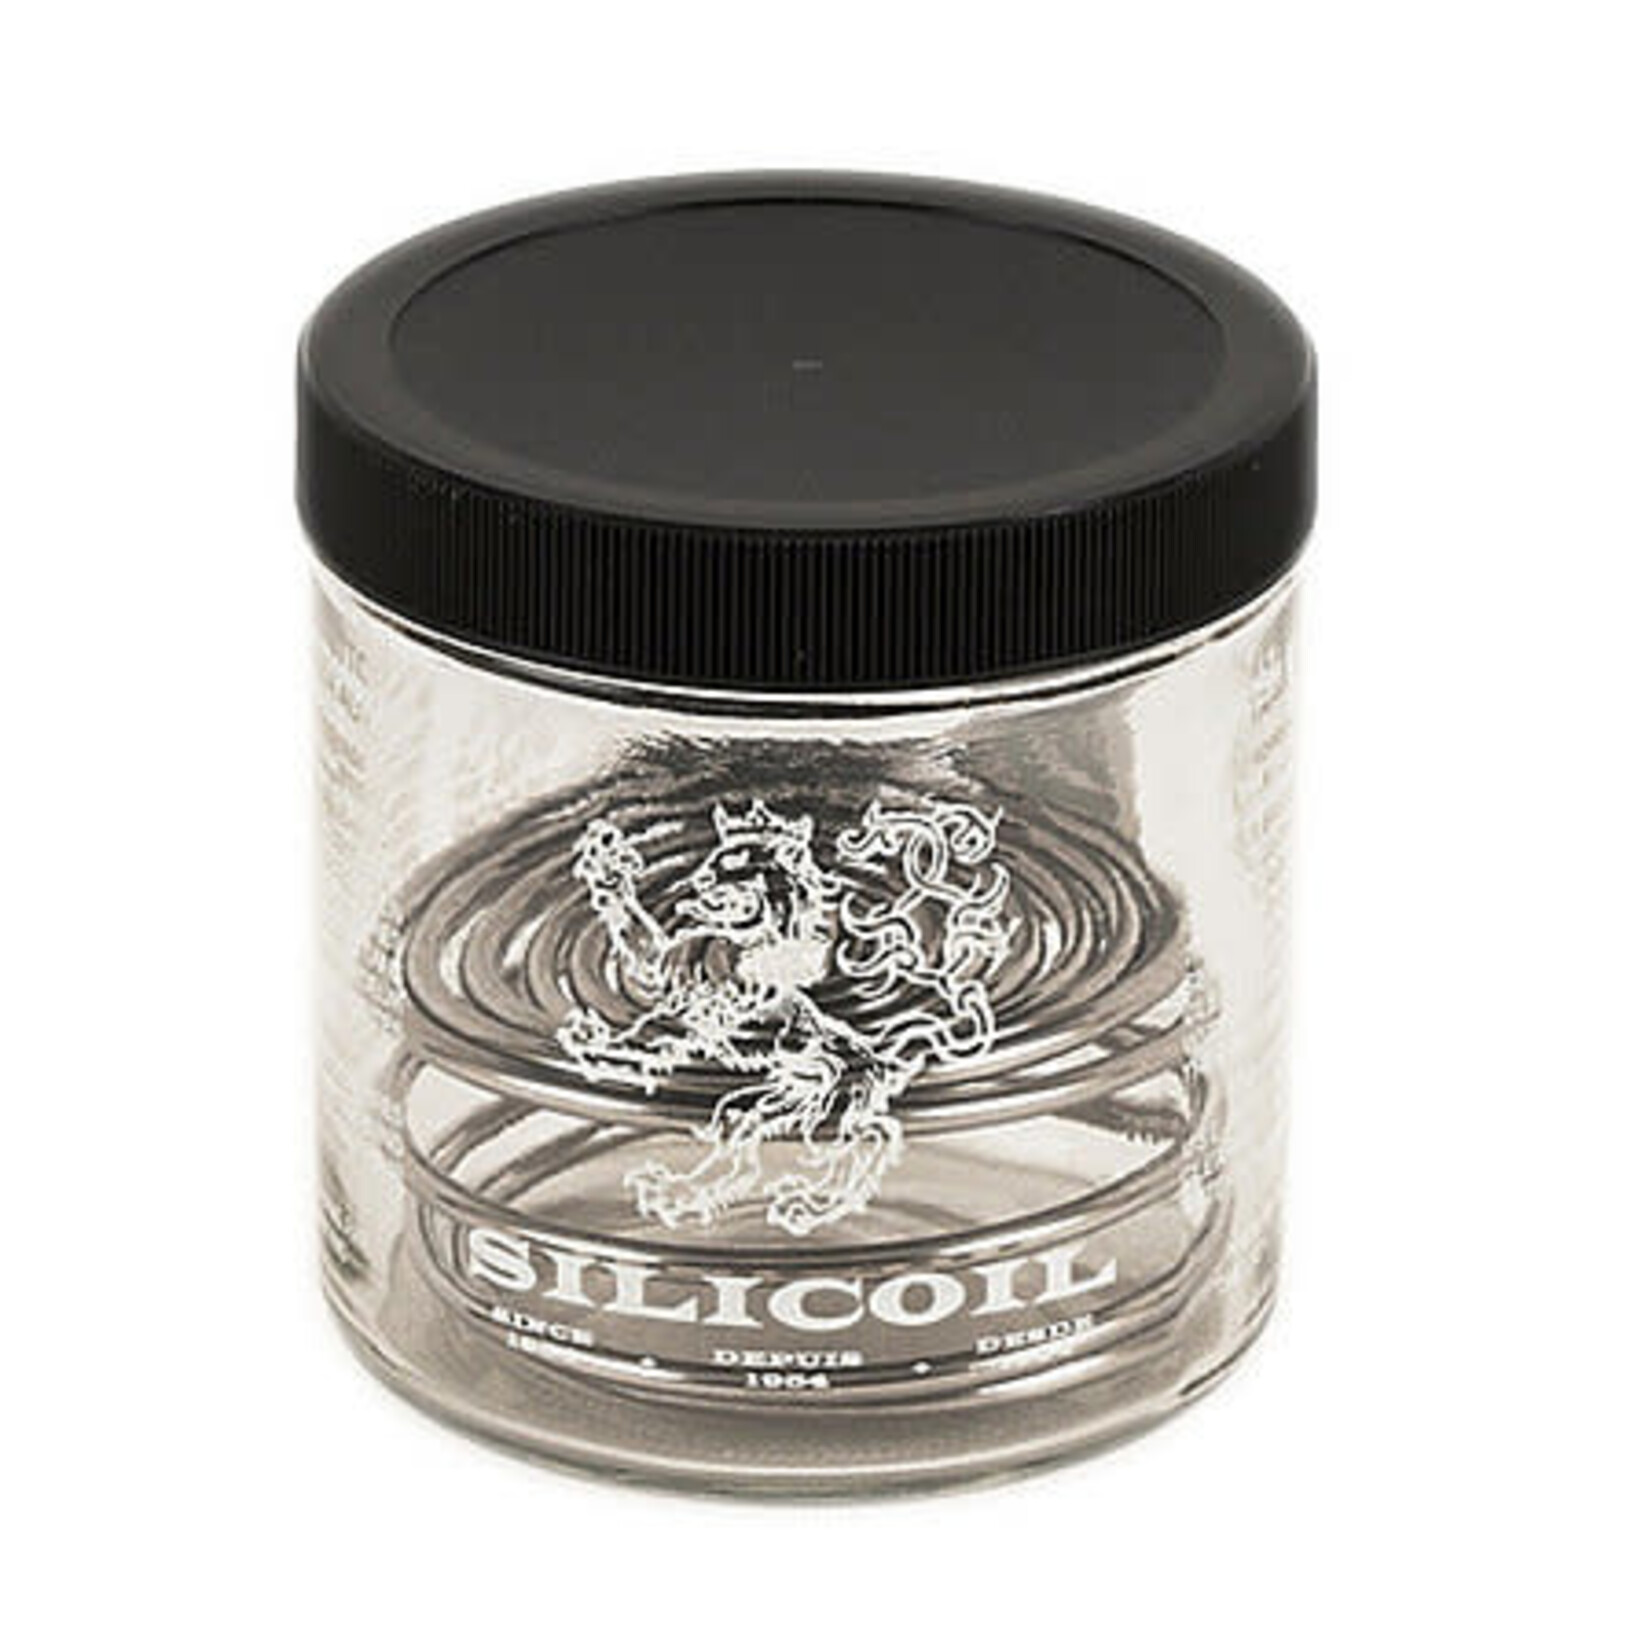 Silicoil Silicoil Brush Cleaning Tank Jar, 12 Oz.